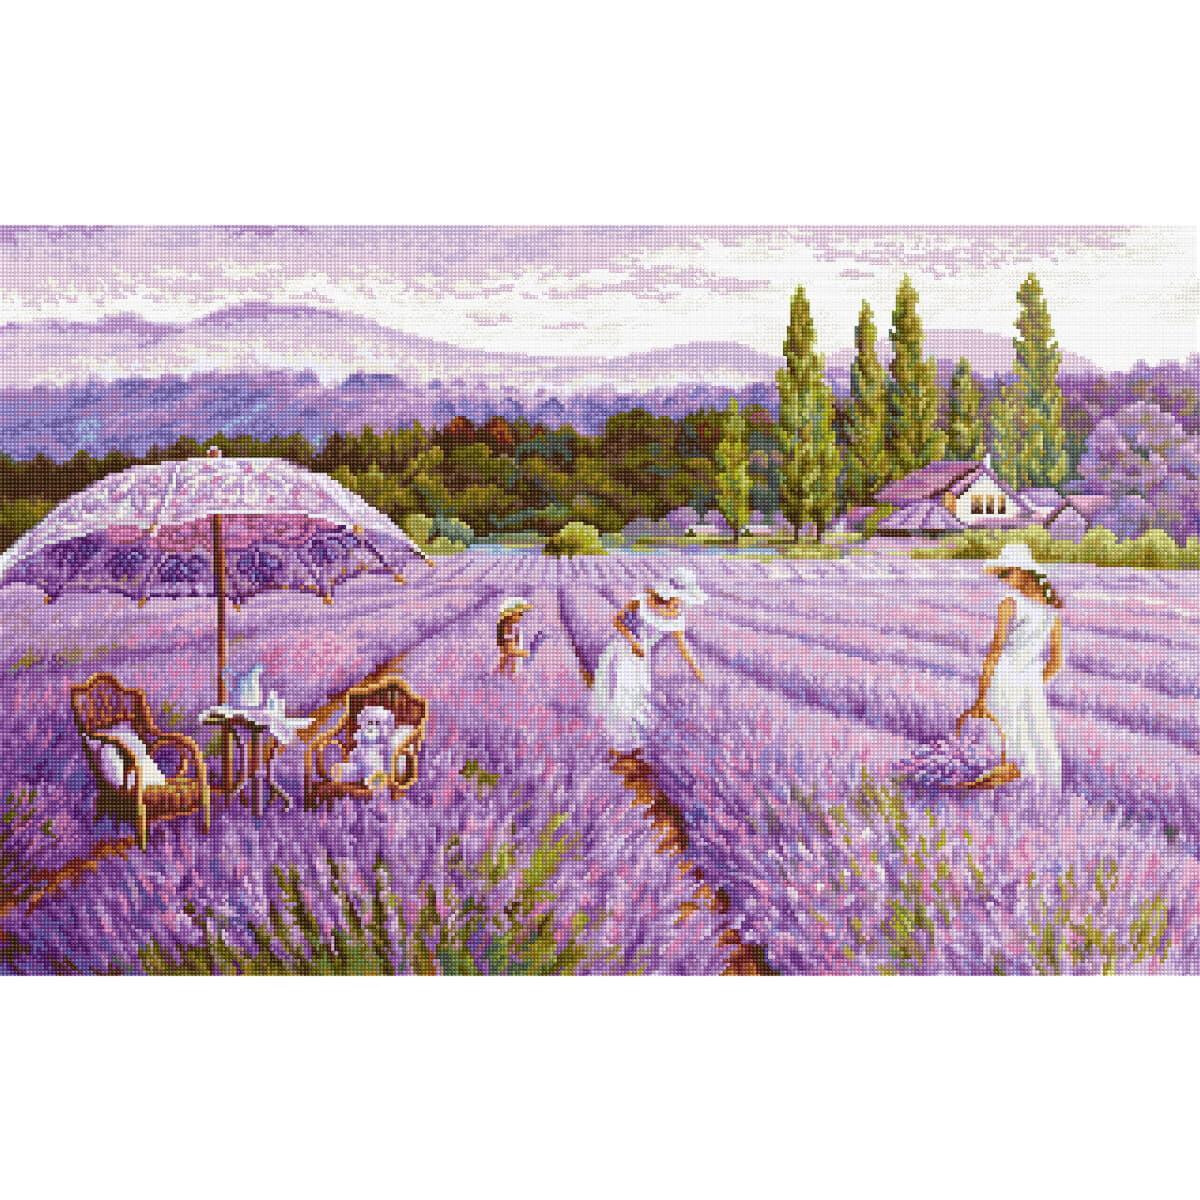 A picturesque lavender field stretches out under a...